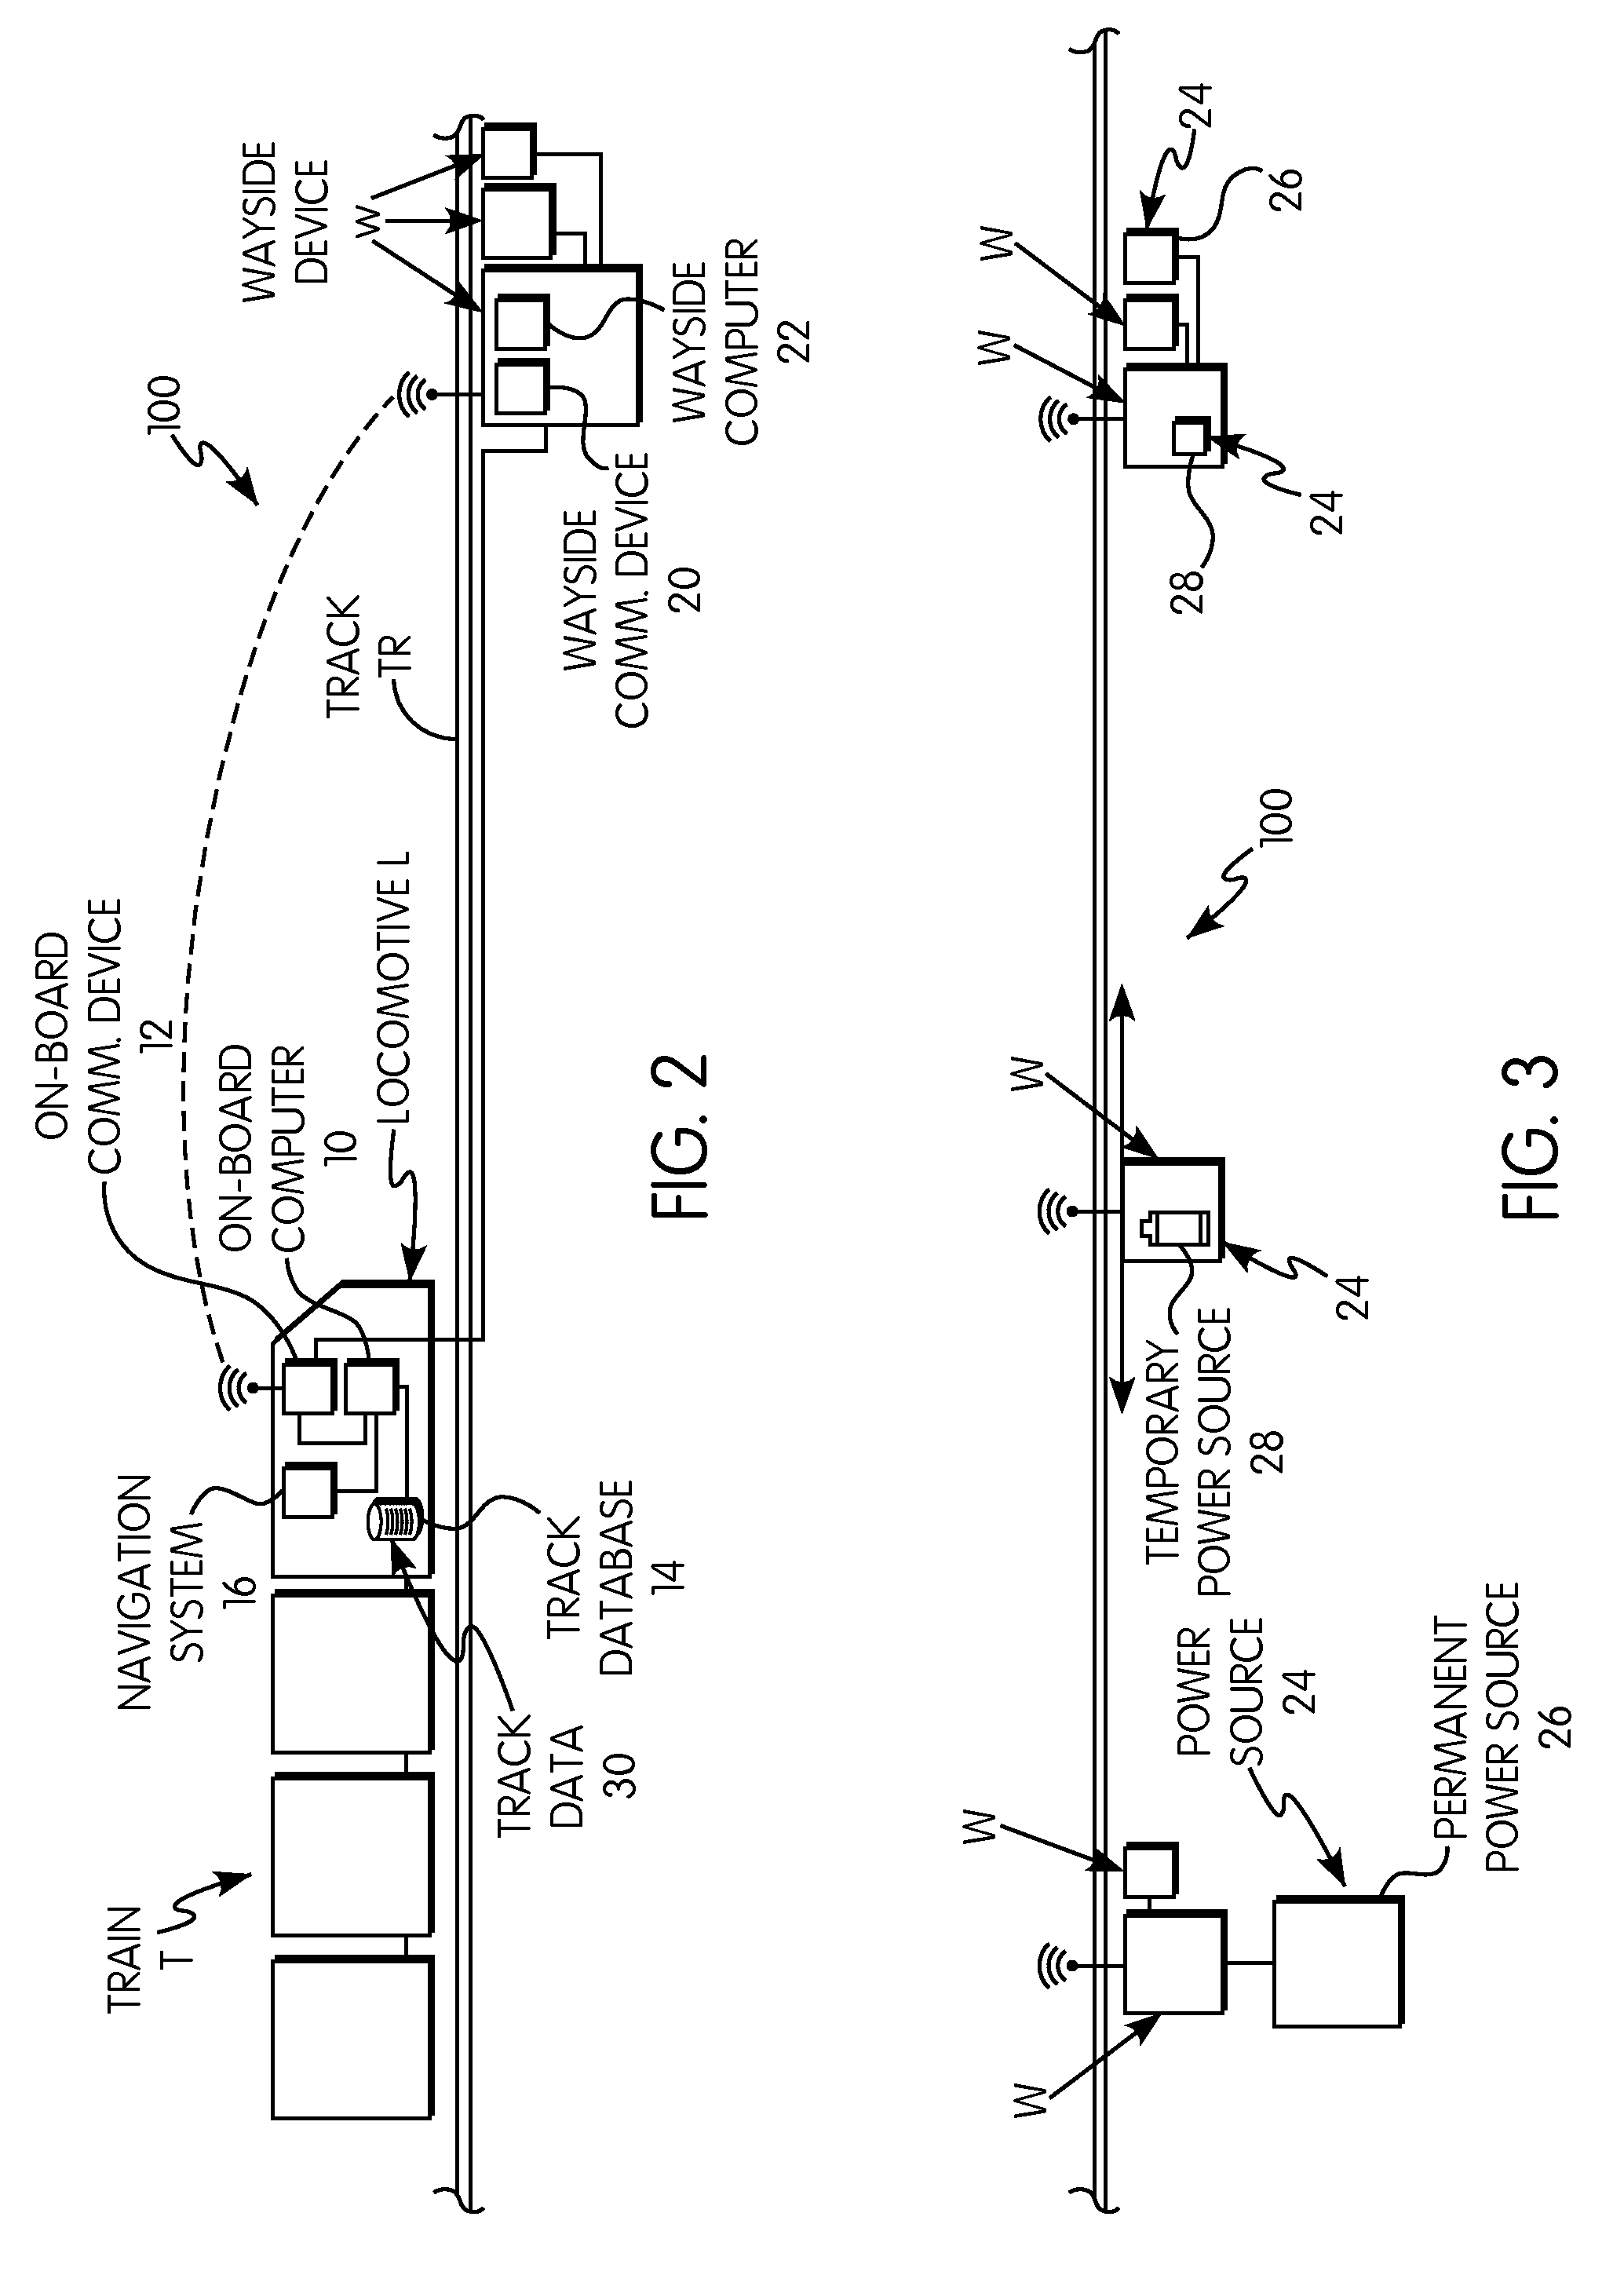 Locomotive-To-Wayside Device Communication System and Method and Wayside Device Therefor